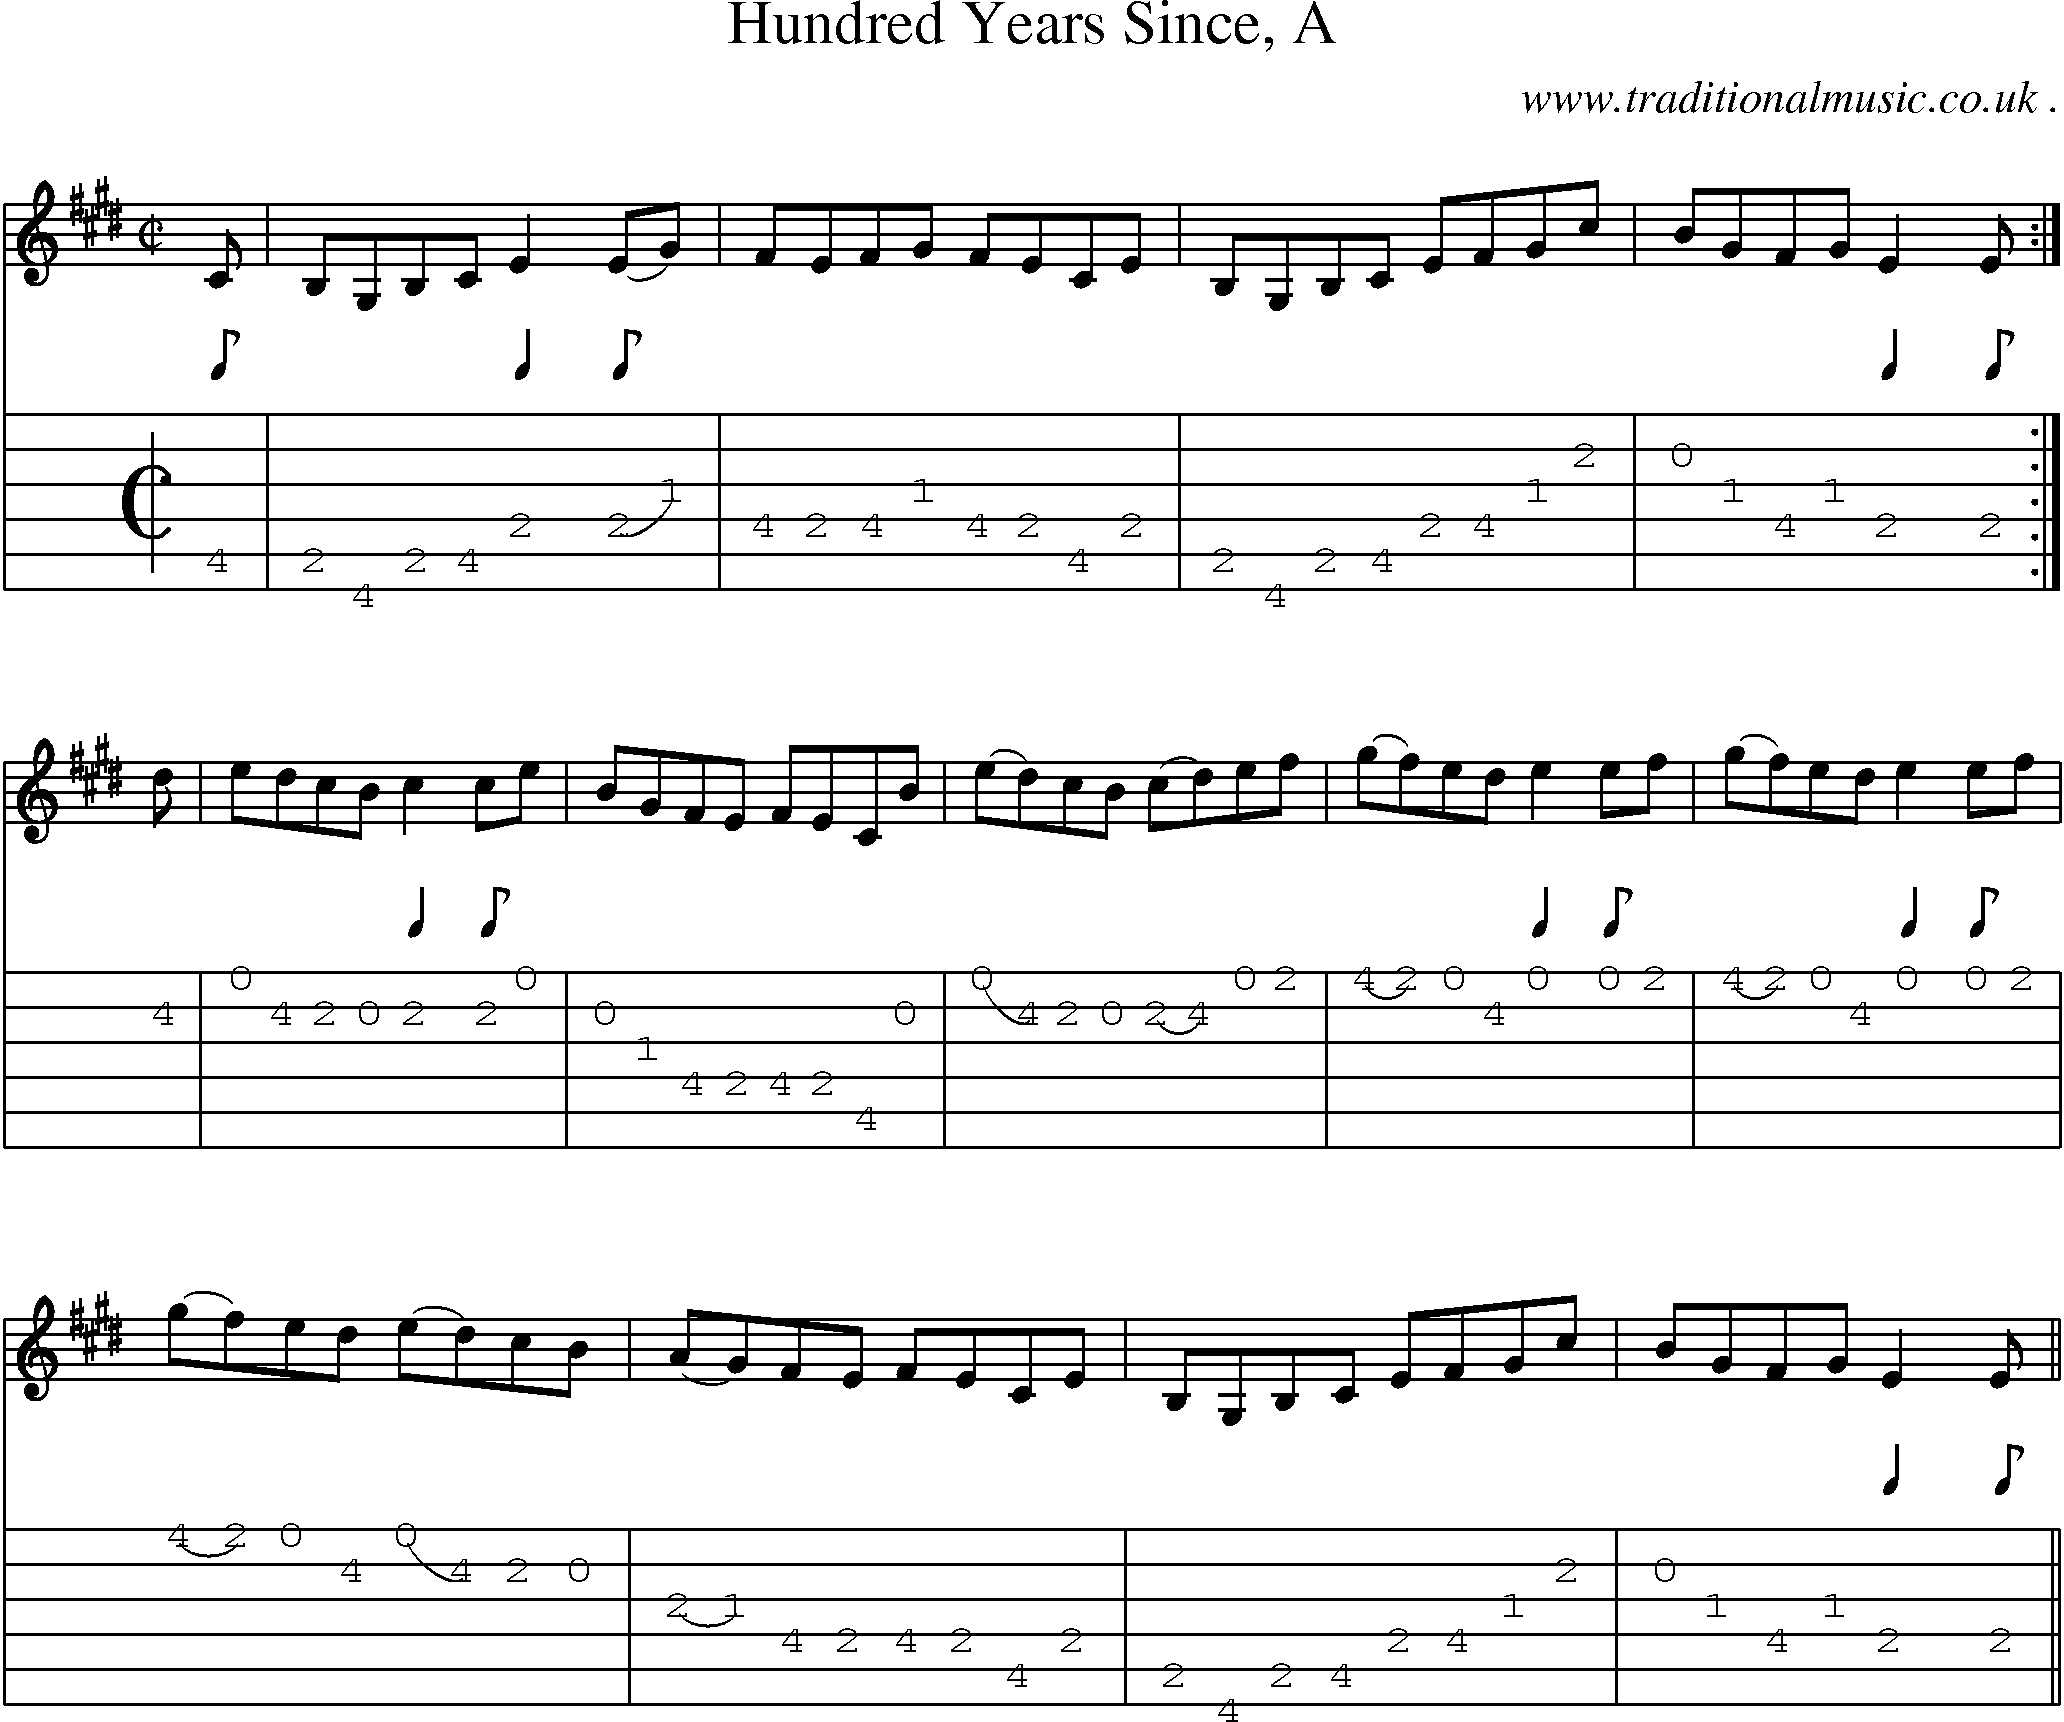 Sheet-music  score, Chords and Guitar Tabs for Hundred Years Since A